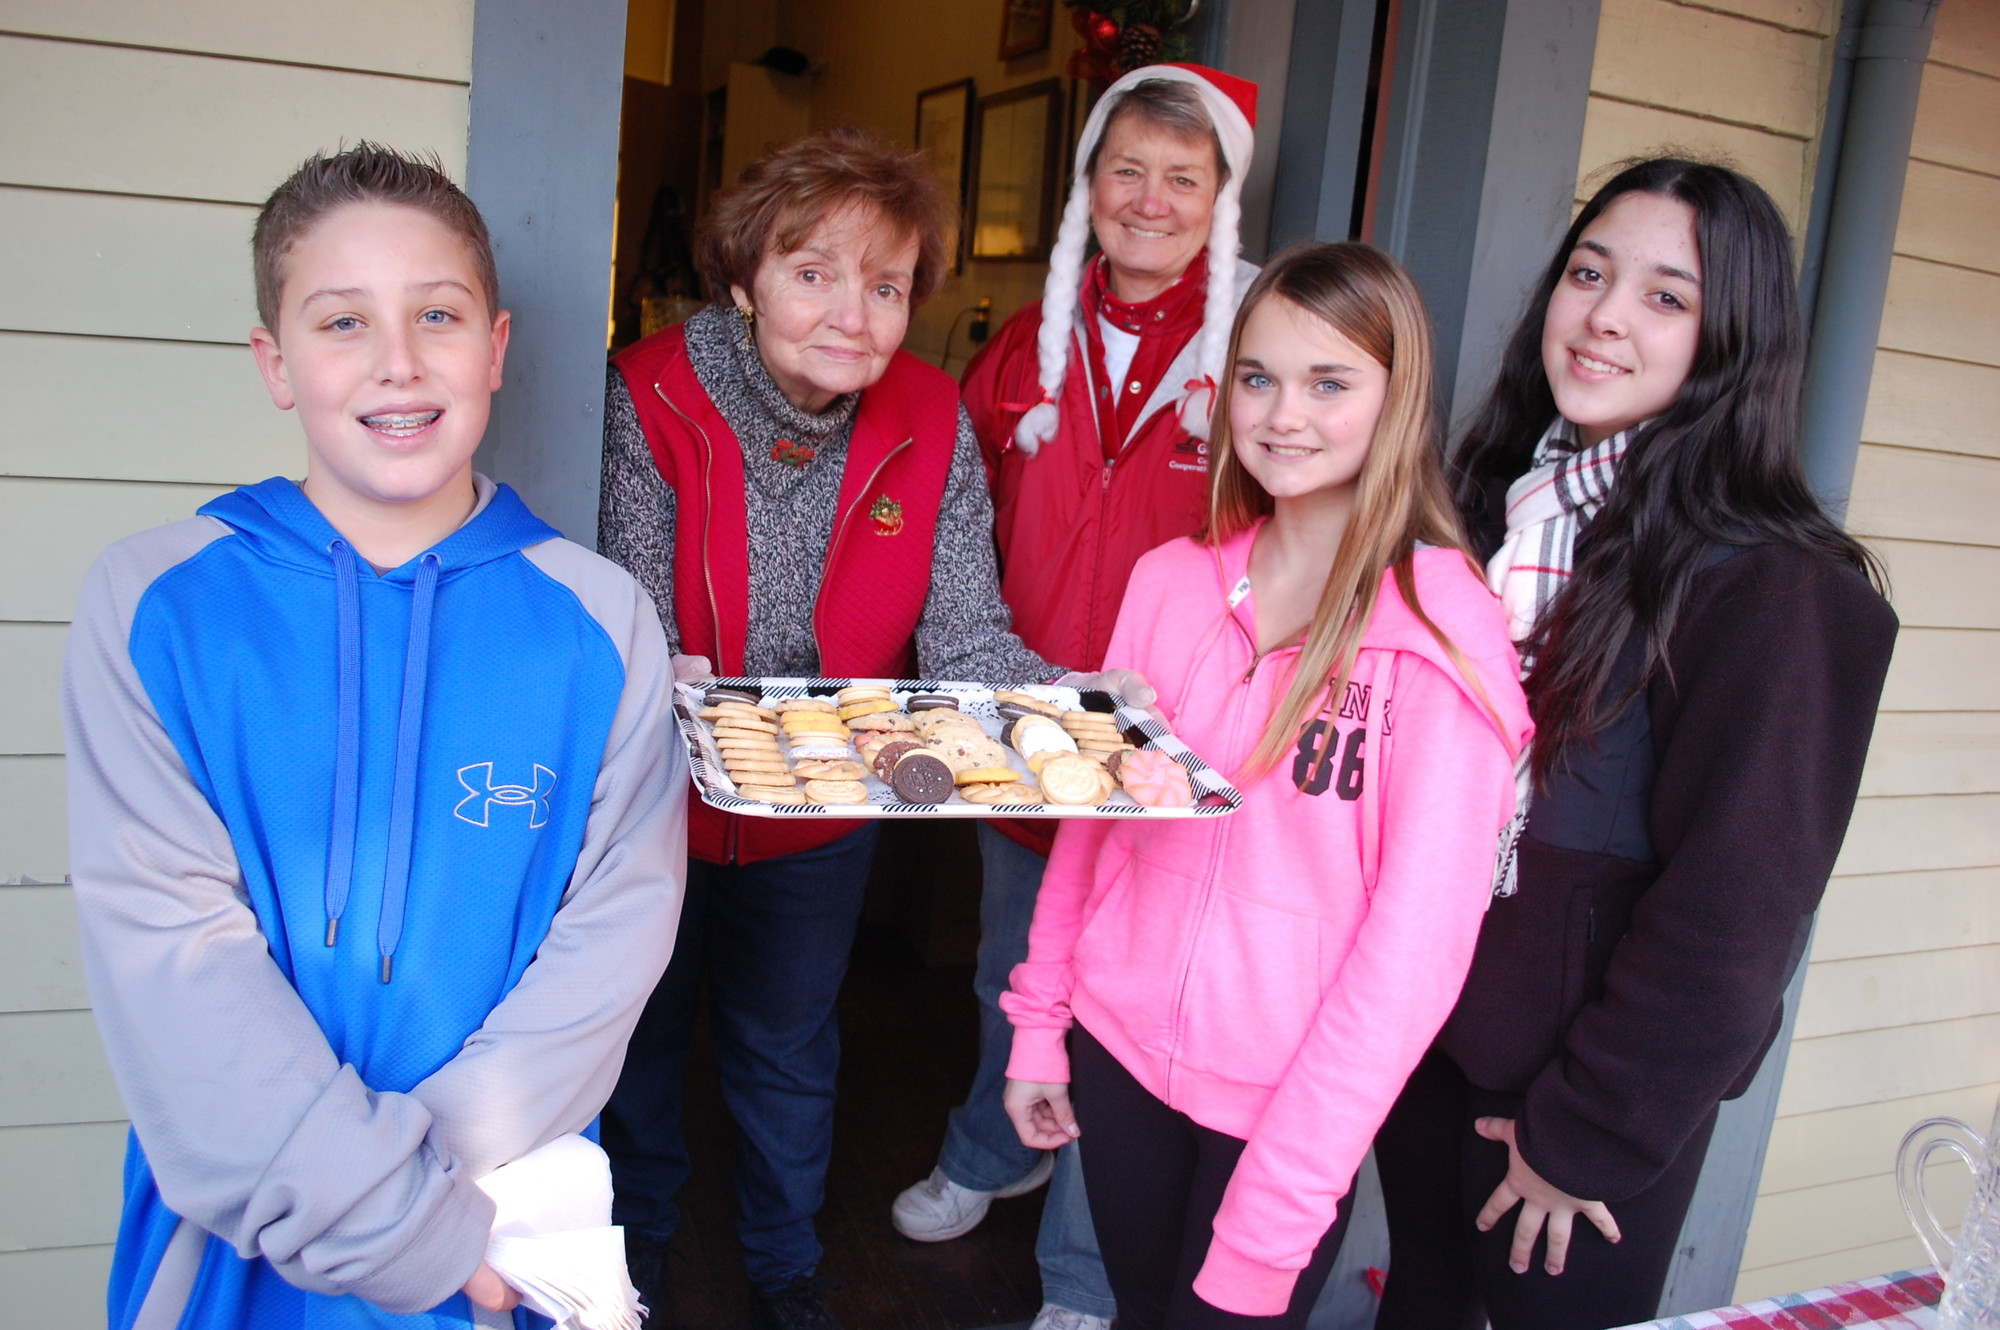 Preservation Society Trustees Elaine Yarris and Cookie Reisert had help from volunteers Michael Badagliacca, Jenna Coscia and Hannah Fay, all 12, in serving treats to visitors.